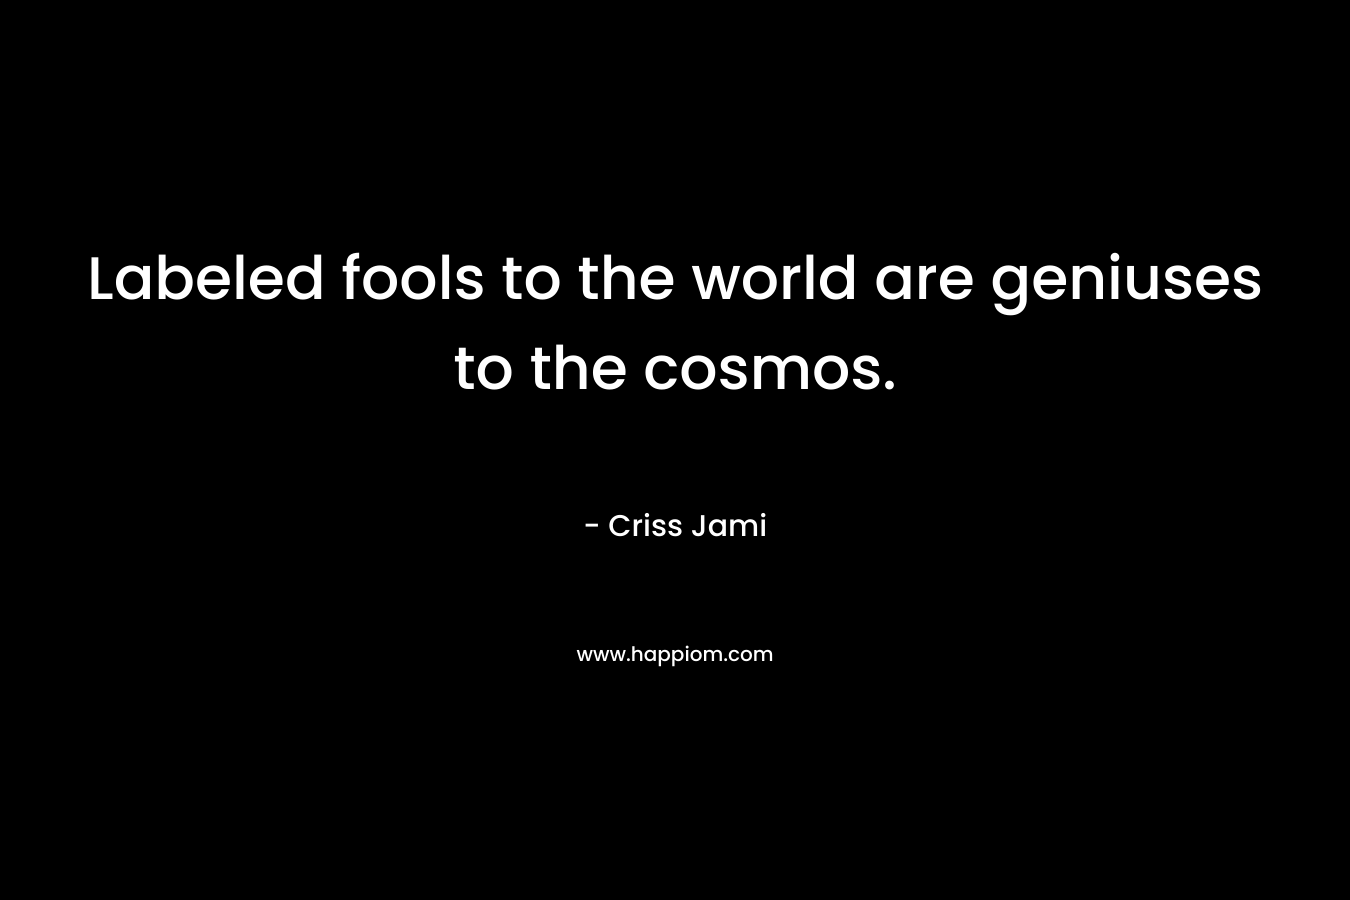 Labeled fools to the world are geniuses to the cosmos.